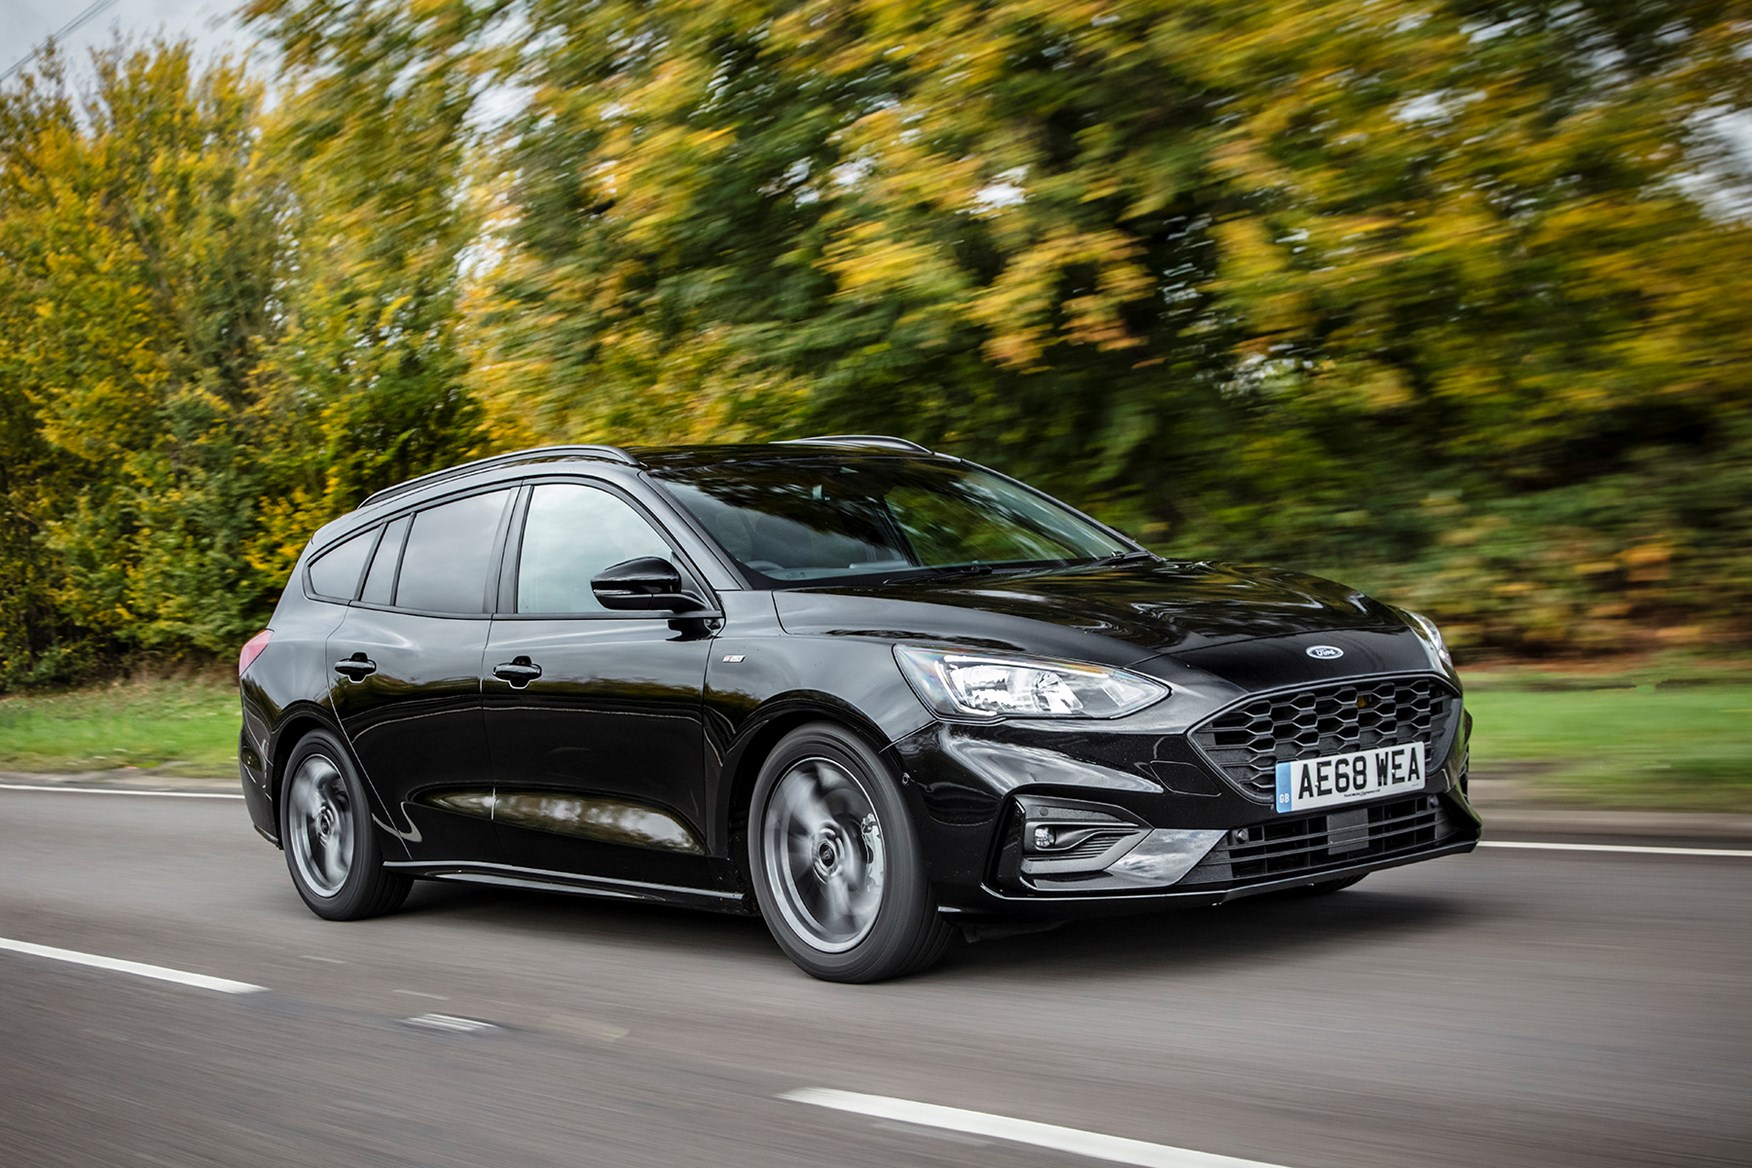 New Ford Focus Estate (2018) review: refreshing simplicity